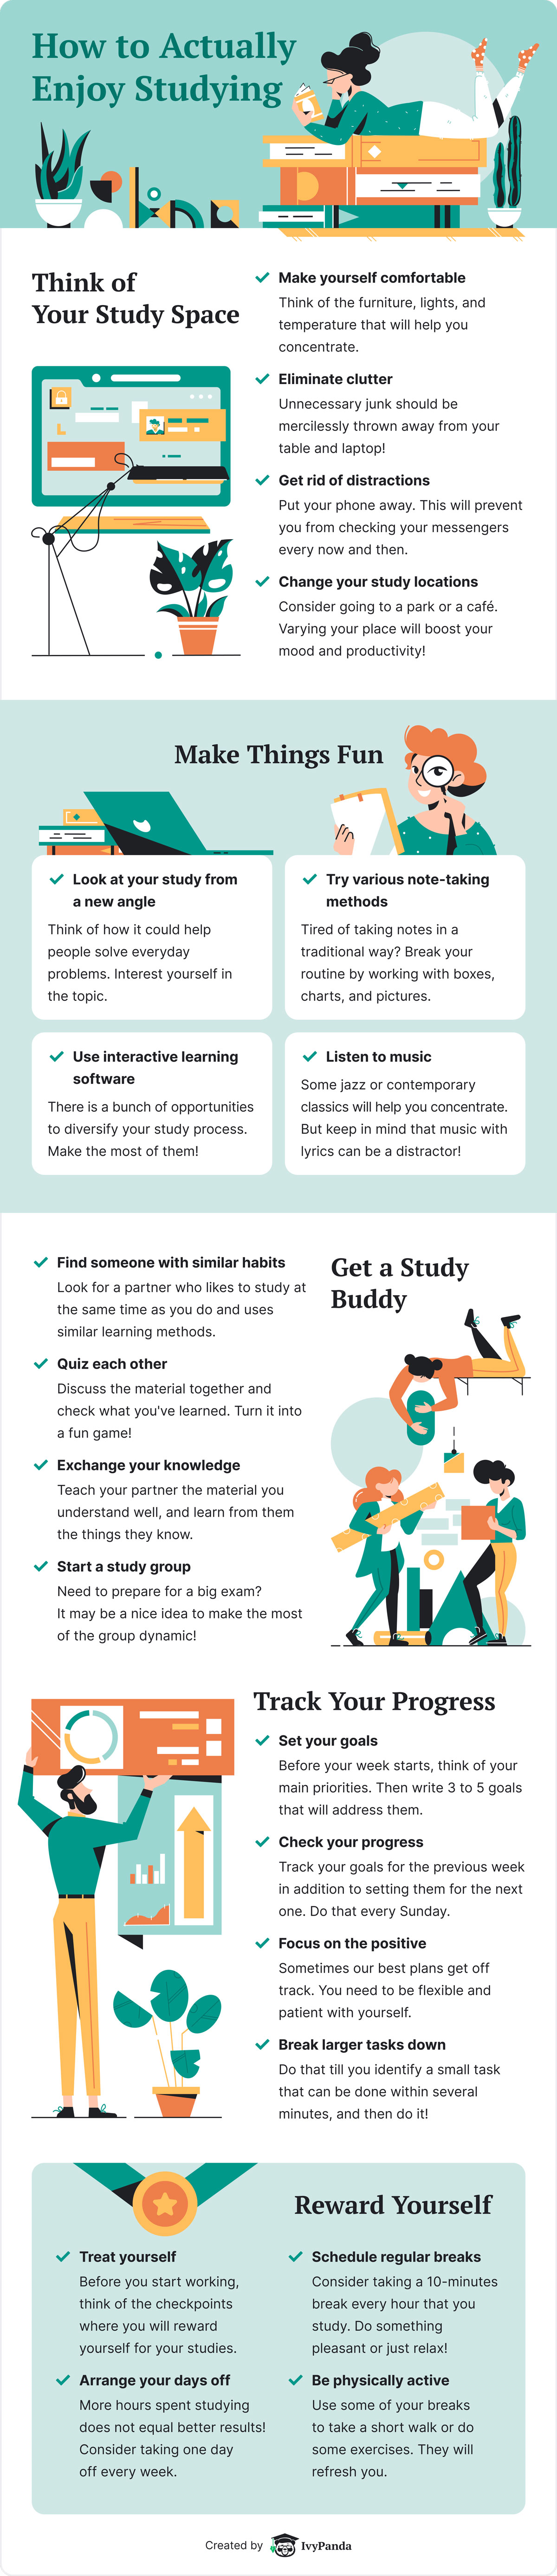 Tired of your study routine❓ Lack motivation❓ Here you’ll find great tips on how to add variety to the learning process and actually 🤓 enjoy your studying!